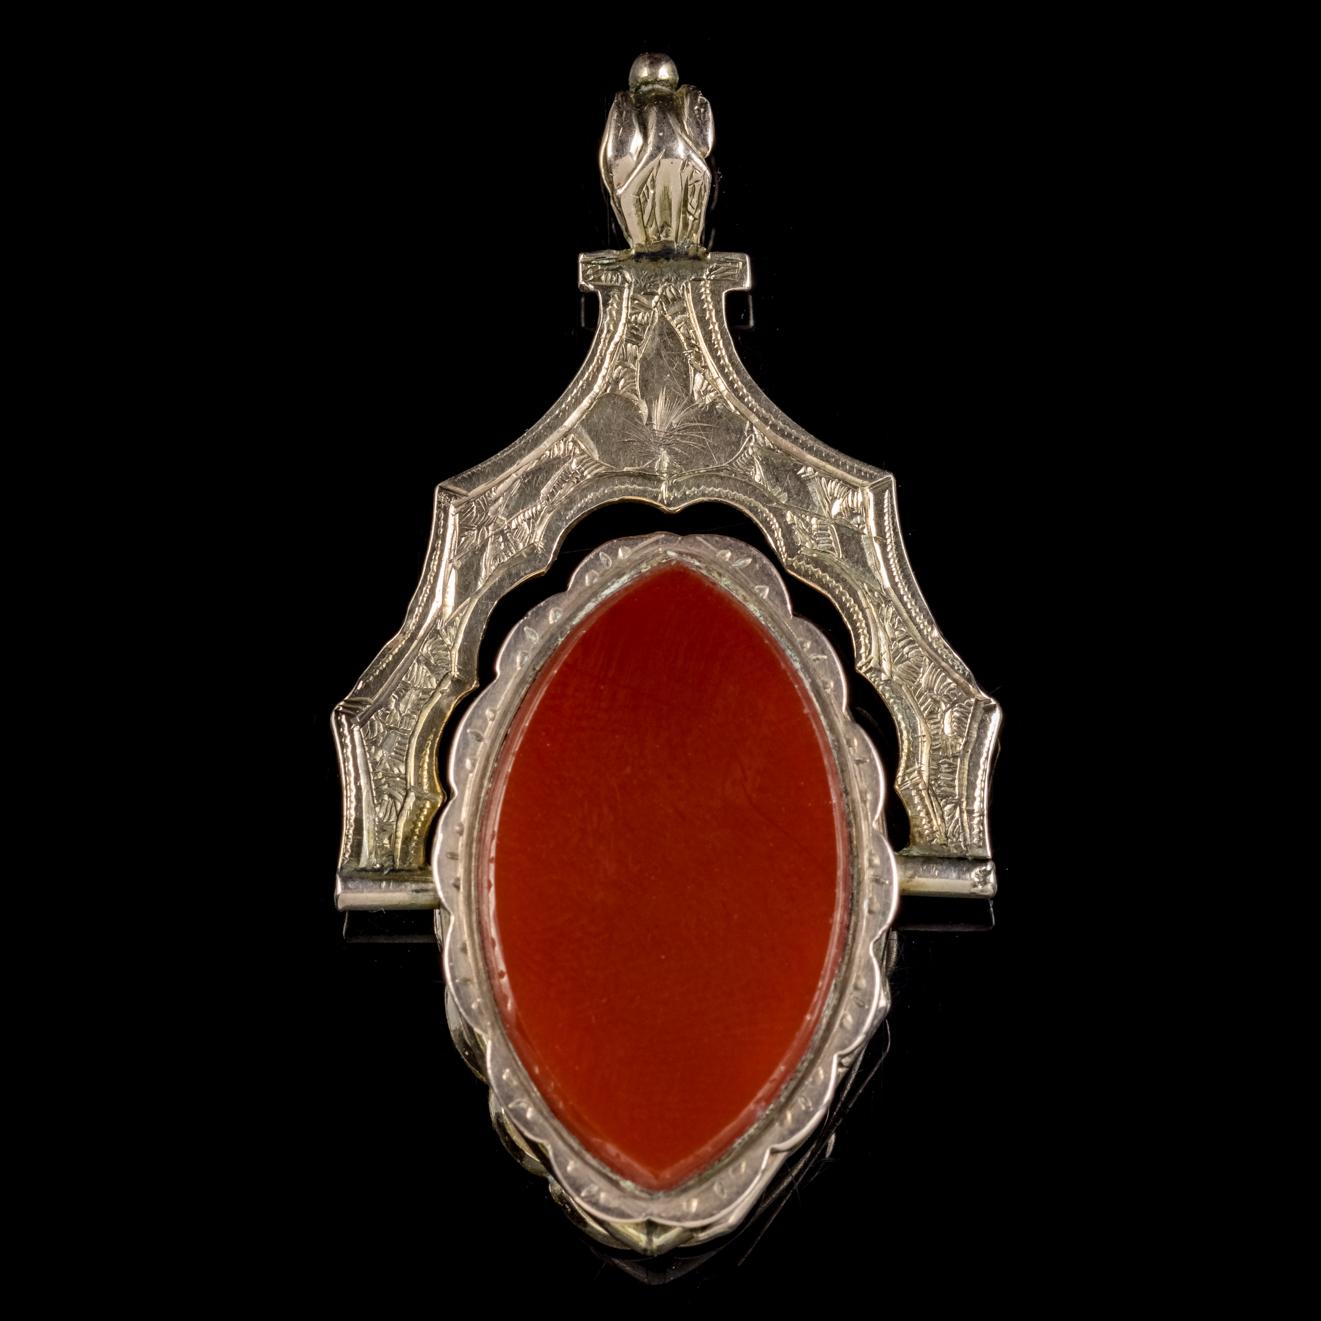 An extraordinary antique 9ct Gold double sided swivel locket from the Victorian era, Circa 1880.

The double sided locket is set with a natural green Jasper stone on the front and a deep orange Carnelian on the reverse. 

Carnelian has been worn